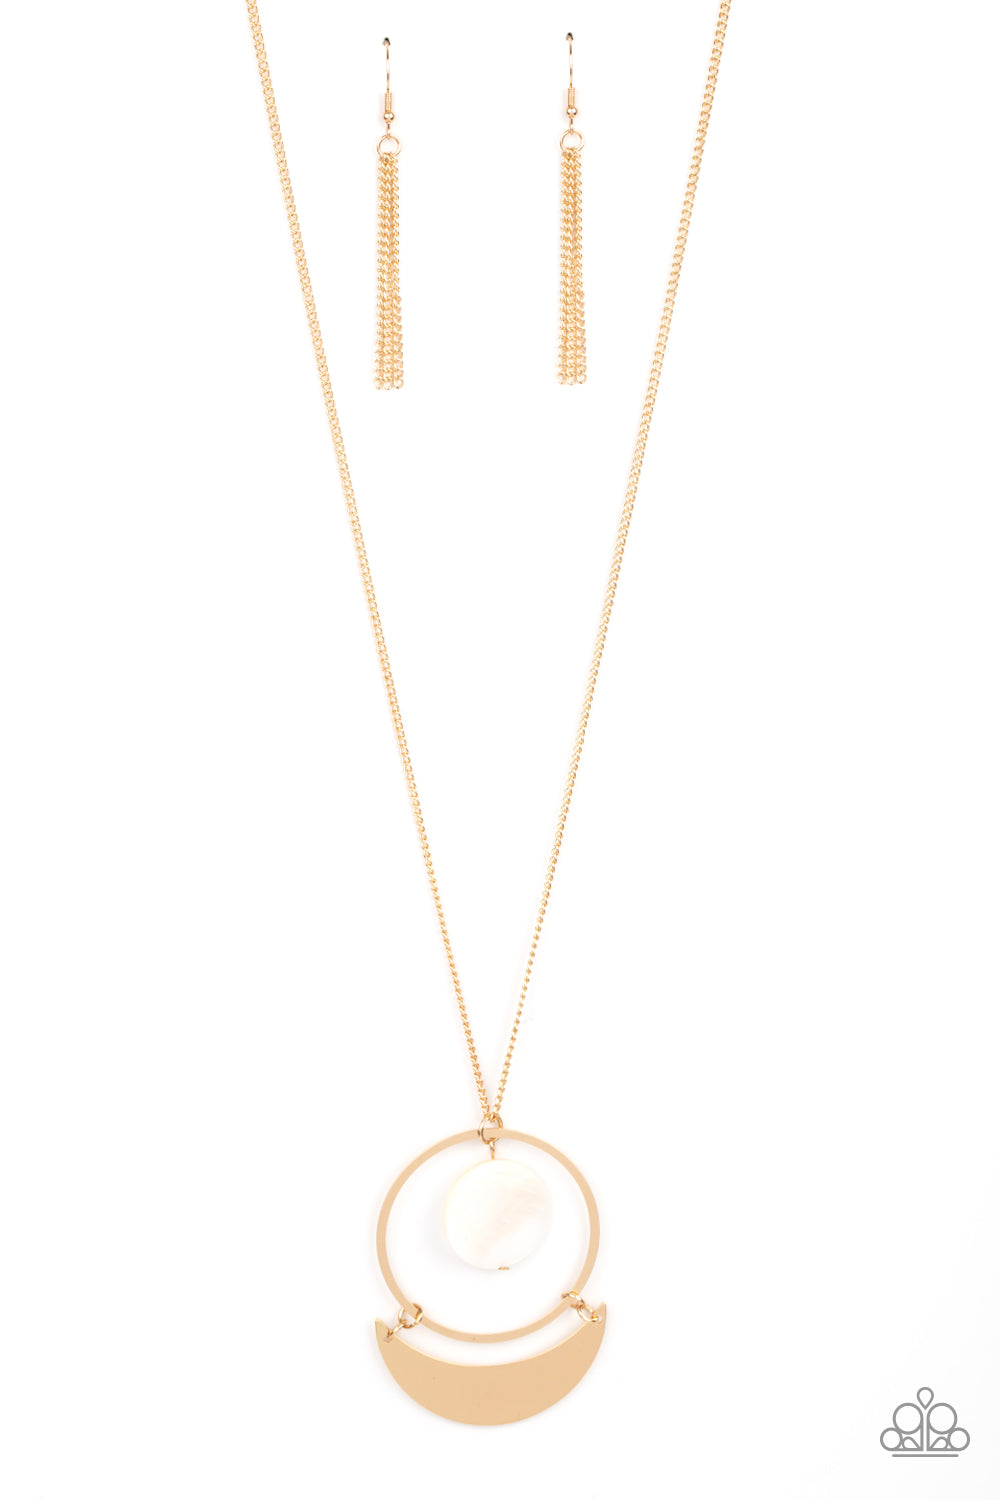 Moonlight Sailing - Gold necklace